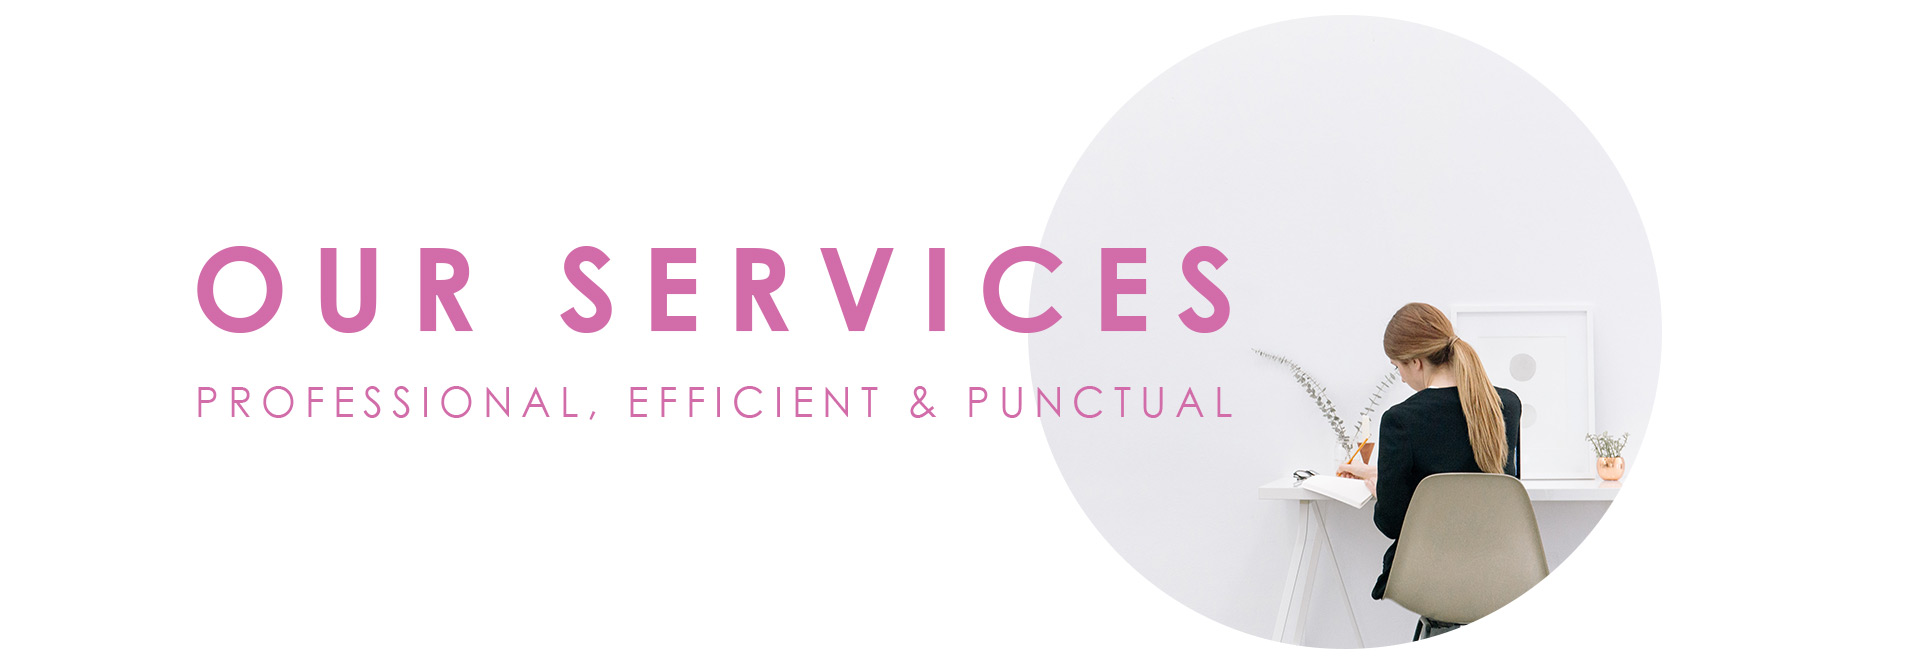 Signed Sealed & Delivered offers professional, efficient and punctual services to all of South Florida. This includes Palm Beach, Broward and Miami-Dade Counties.